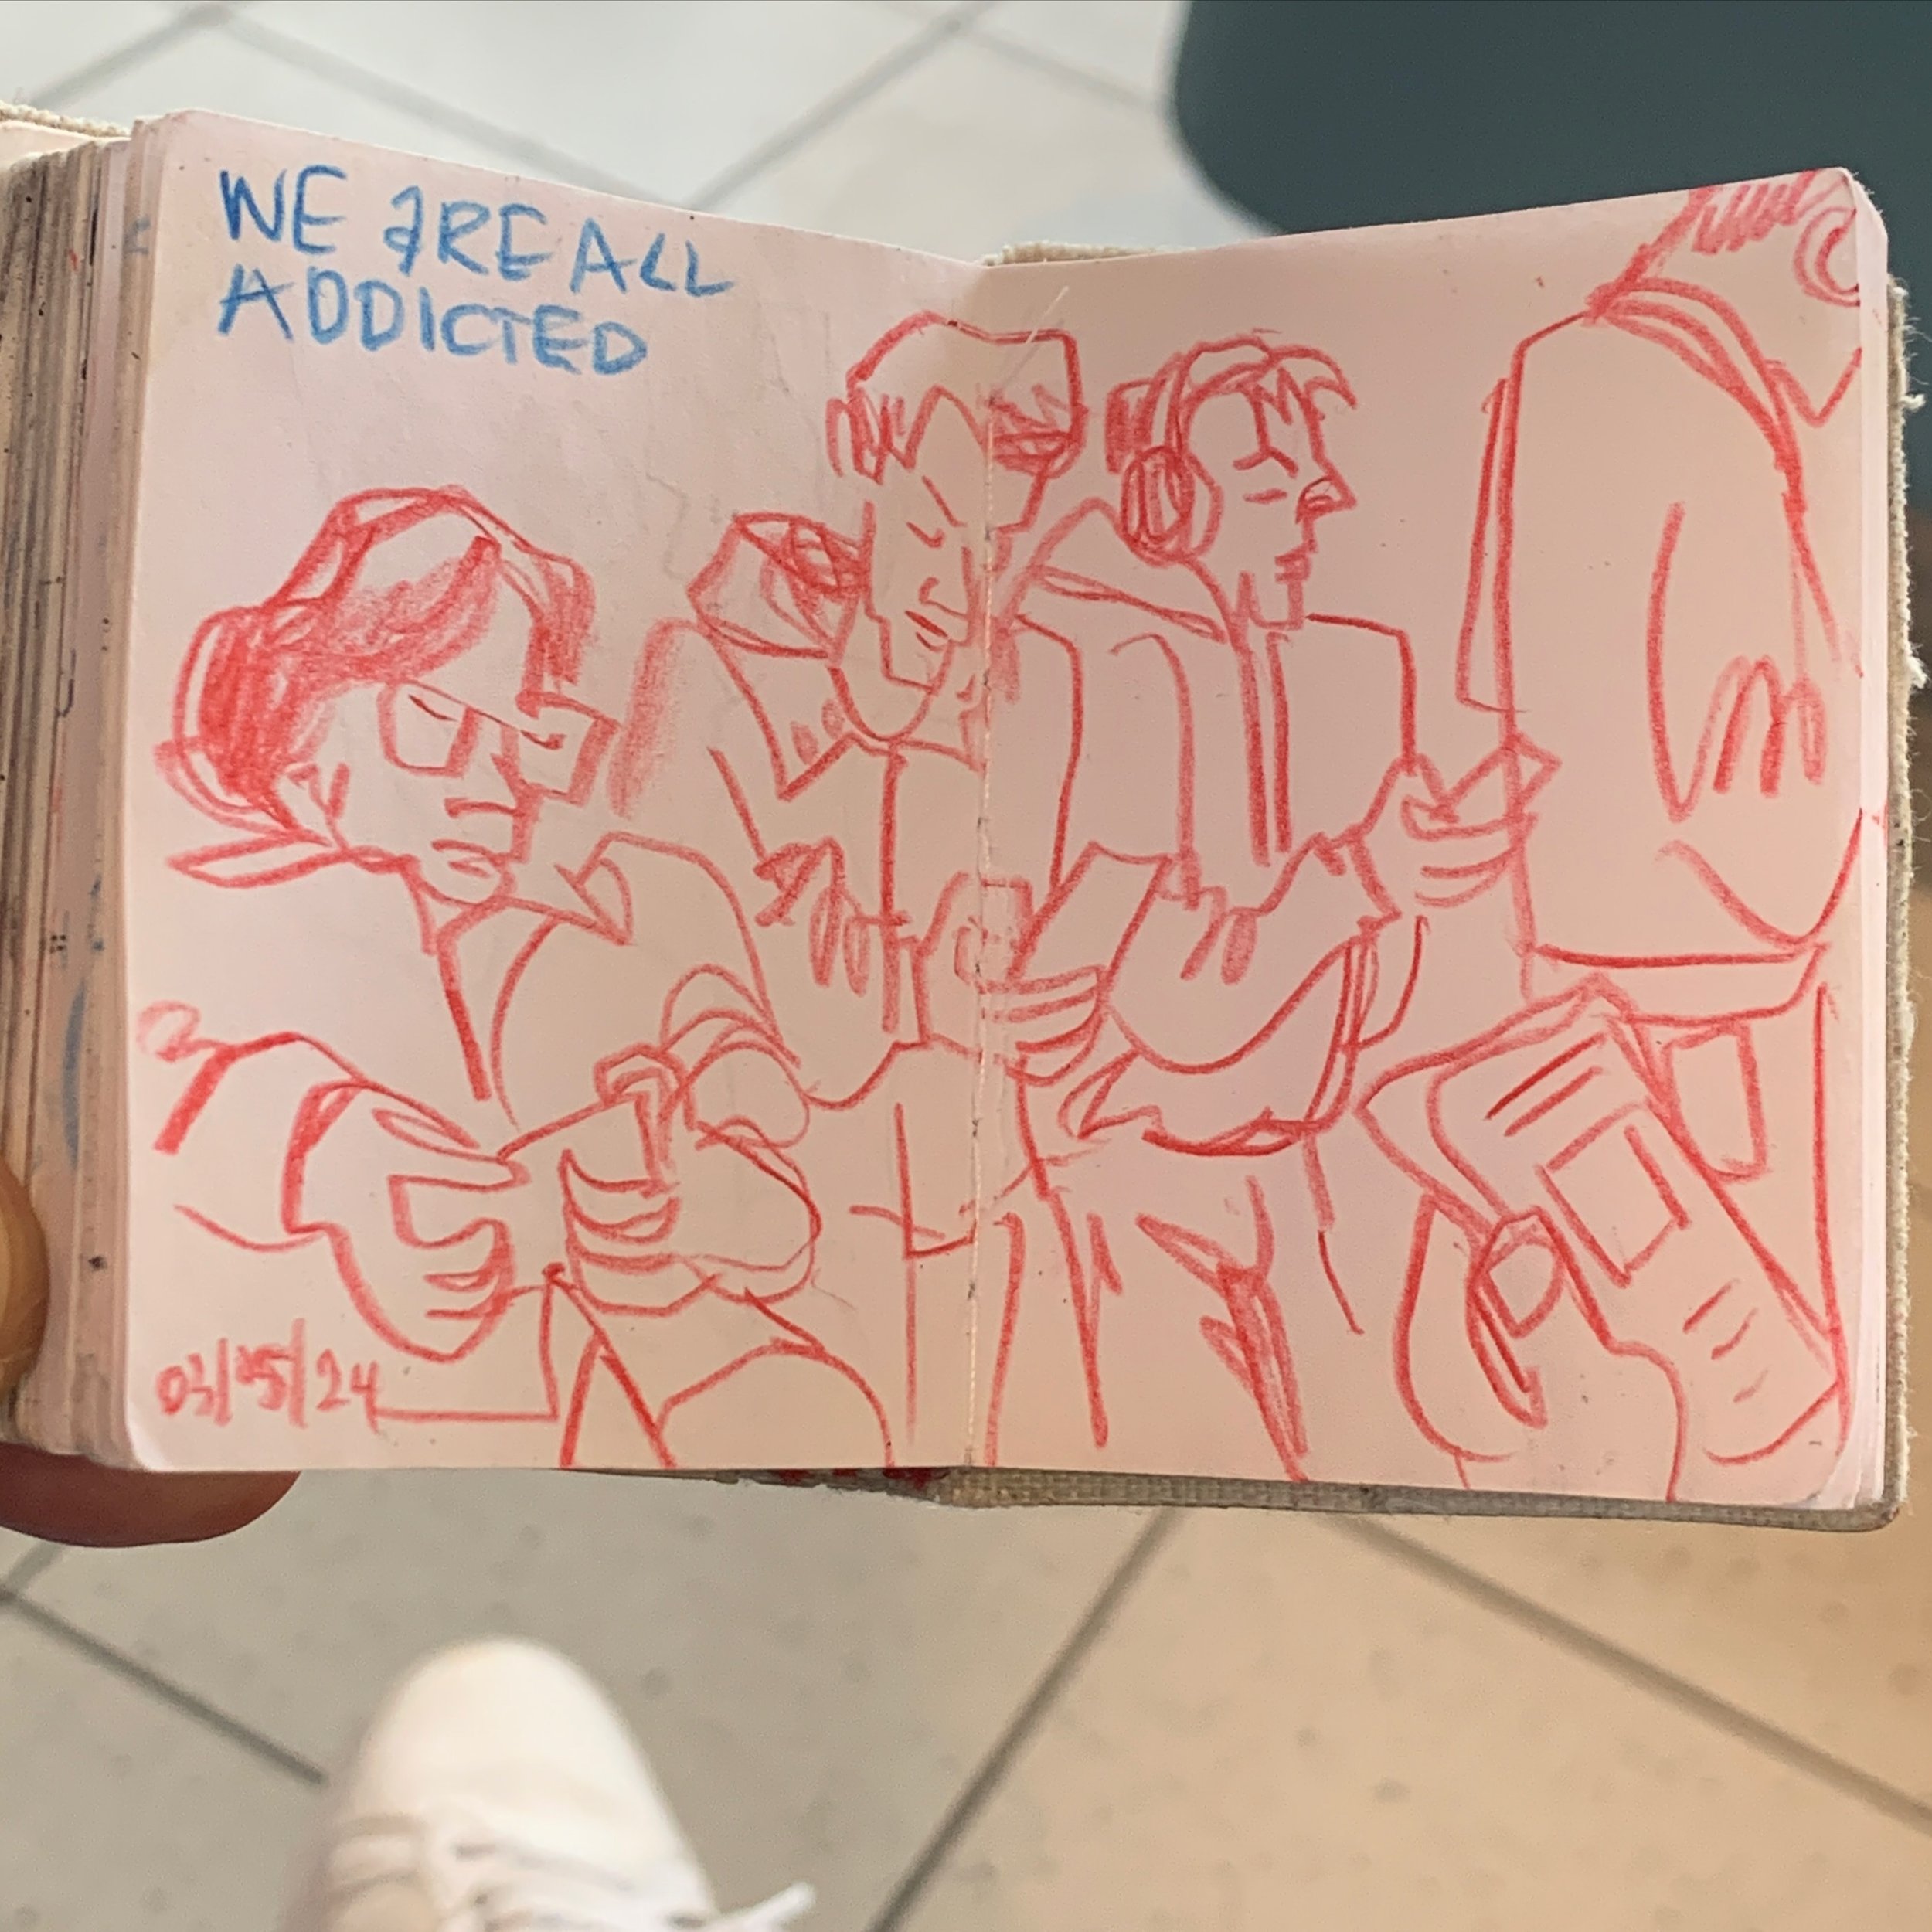 I am on my way to the US. On the train to the airport, I was surrounded by commuters who were all looking at their smart phones. 

Materials used:
-tiny sketchbook, no brand
-steadler blue and red colored pencil